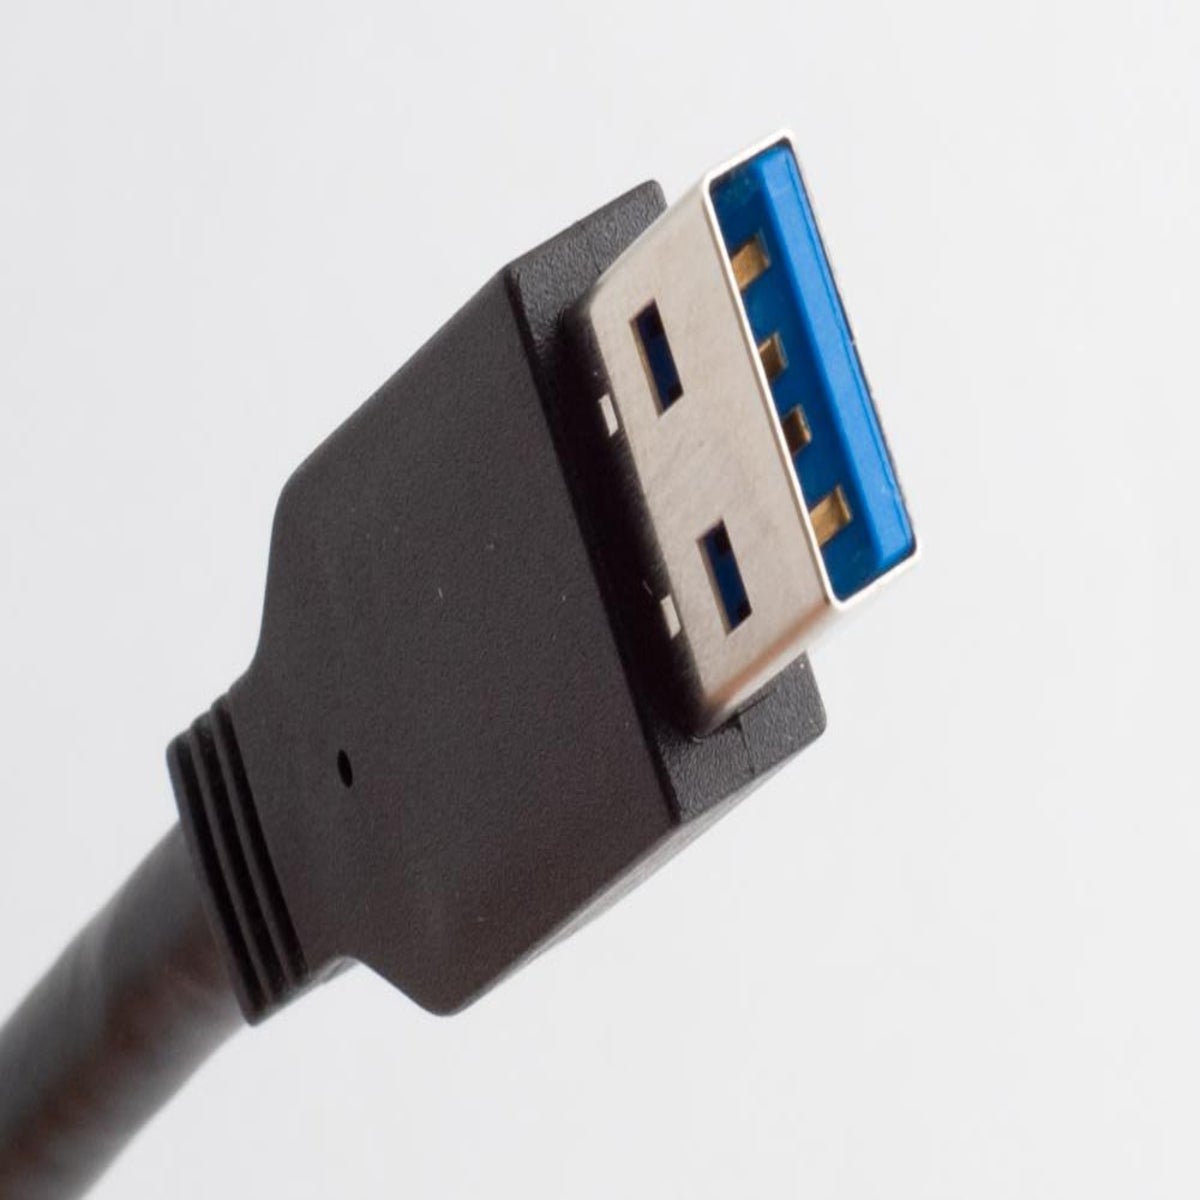 Next USB standard will boast data transfers of 10GB/second | The Independent | Independent